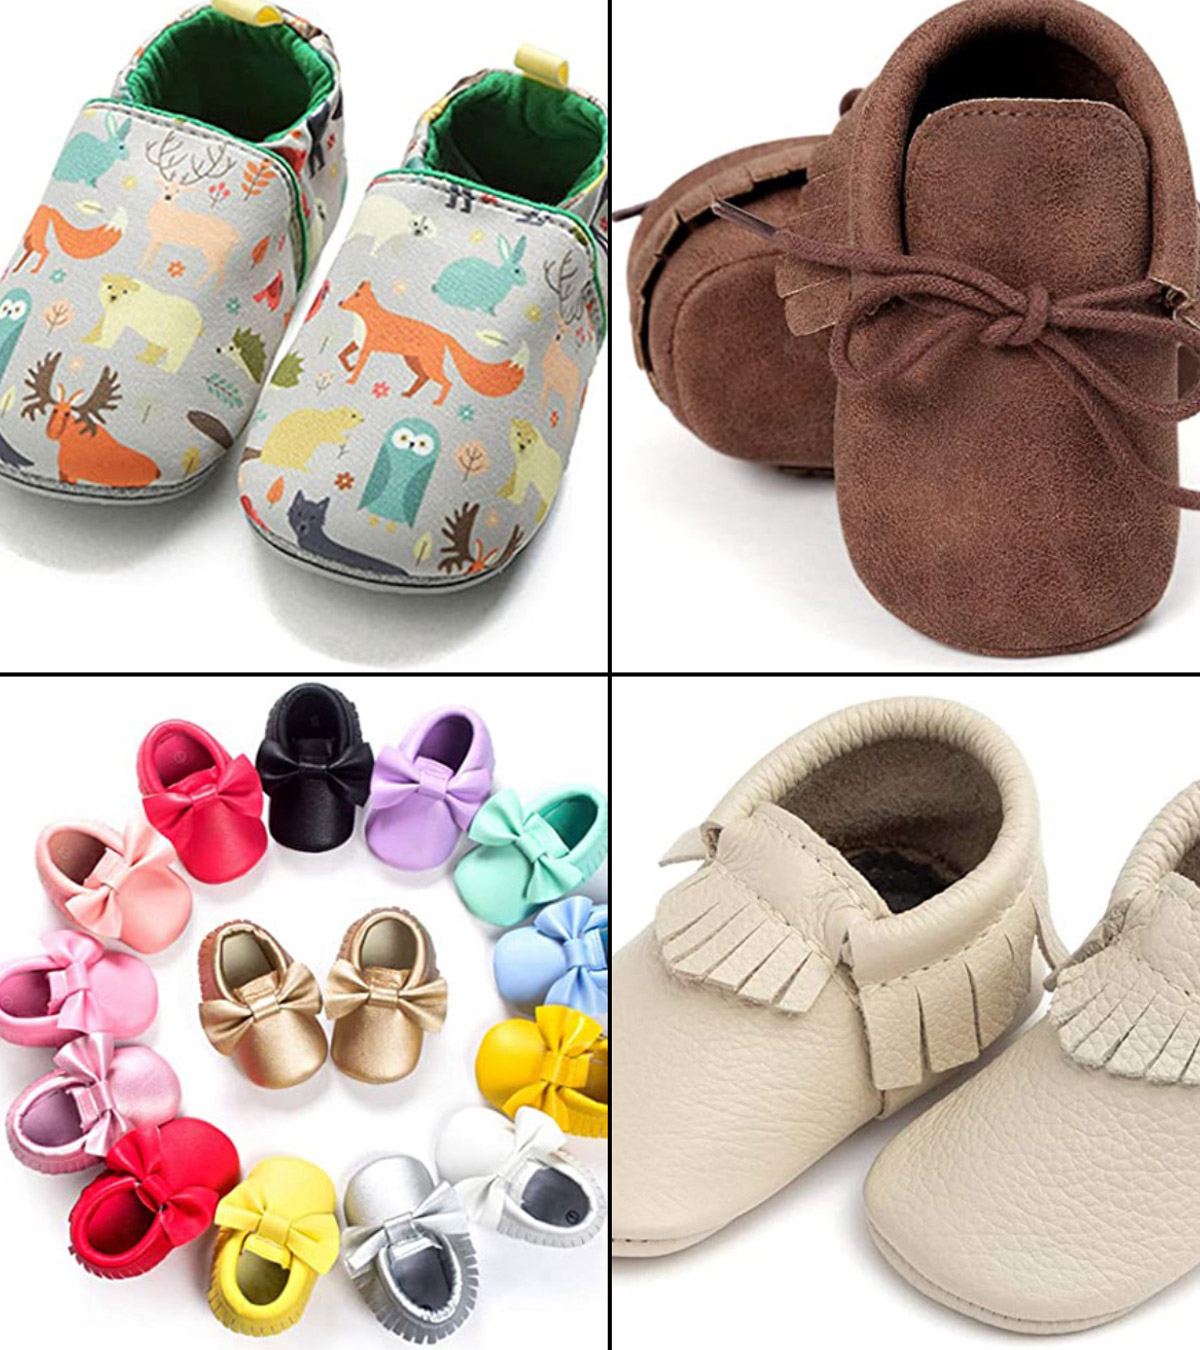 Anrenity Baby Loafers for Infant Boys Girls Crib Flat Boat Shoes Soft Soled Moccasin DDX-004 